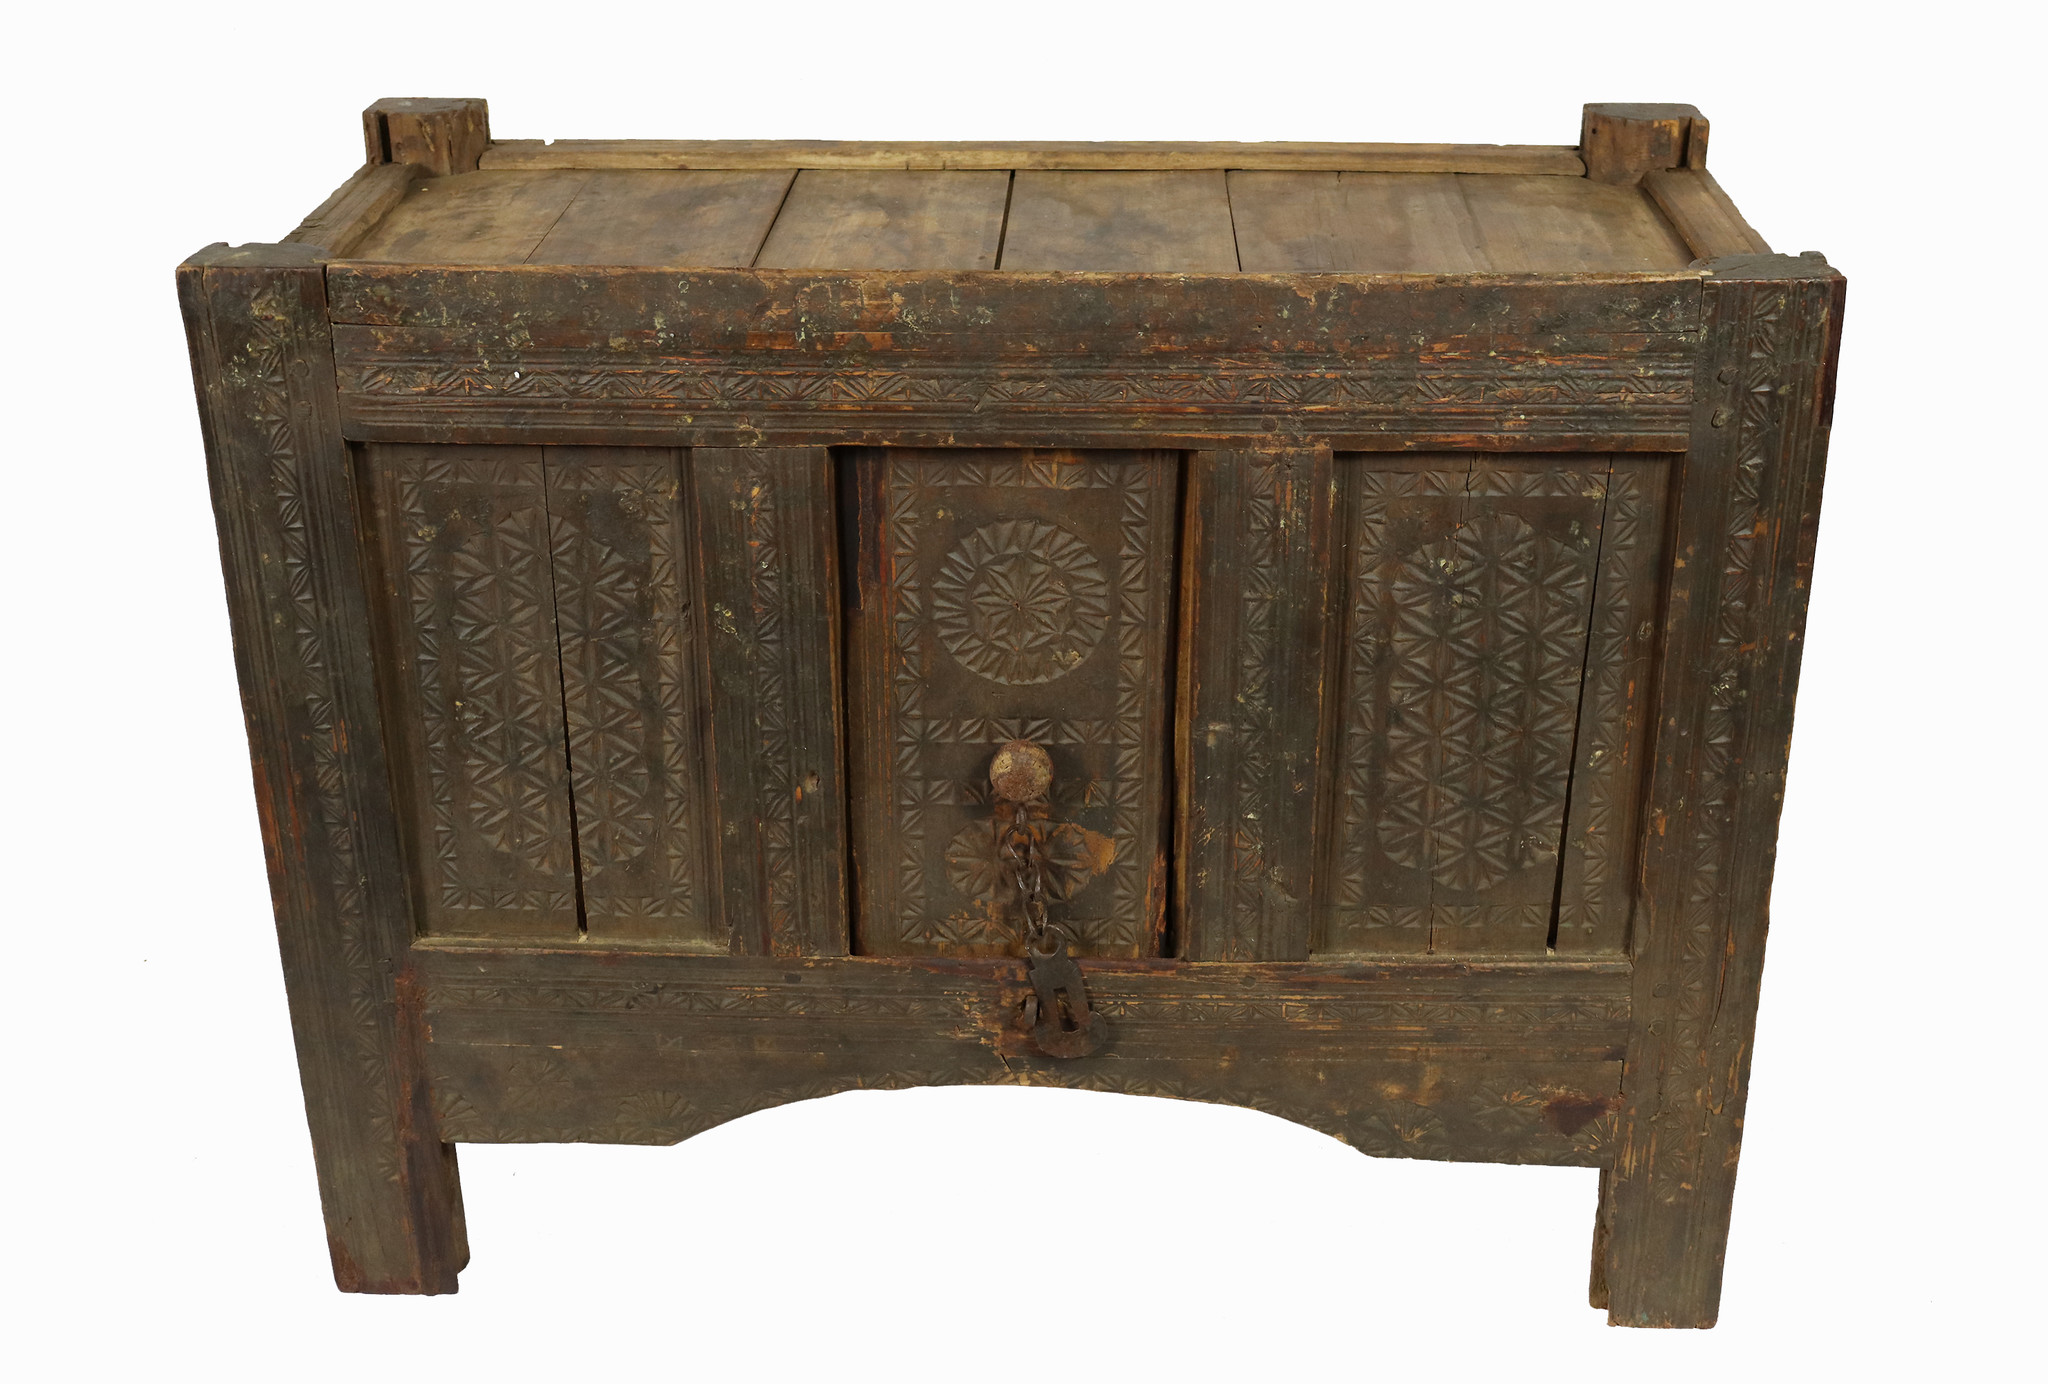 antique 19th century  wooden yurt treasure Dowry Chest from Afghanistan turkmenistan No:22/ 8